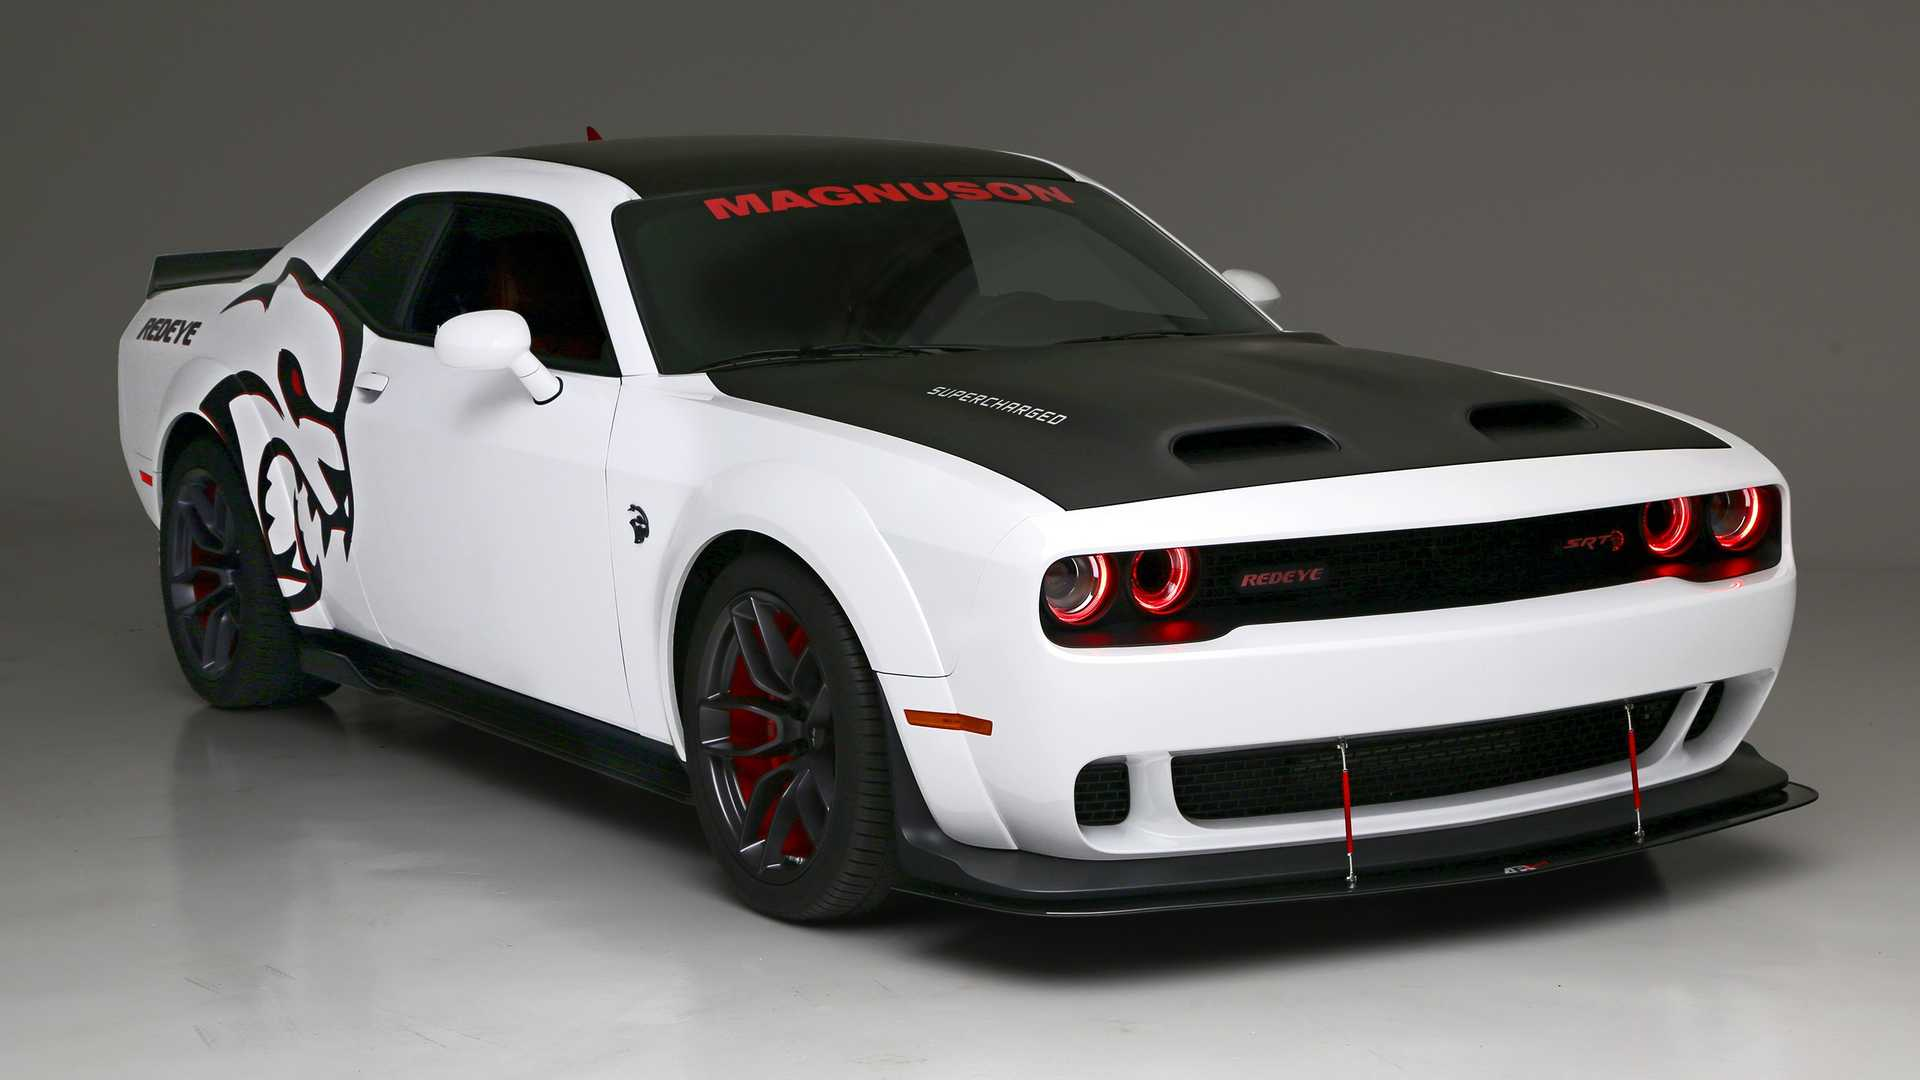 Customized Demon Cars Wallpapers - Wallpaper Cave